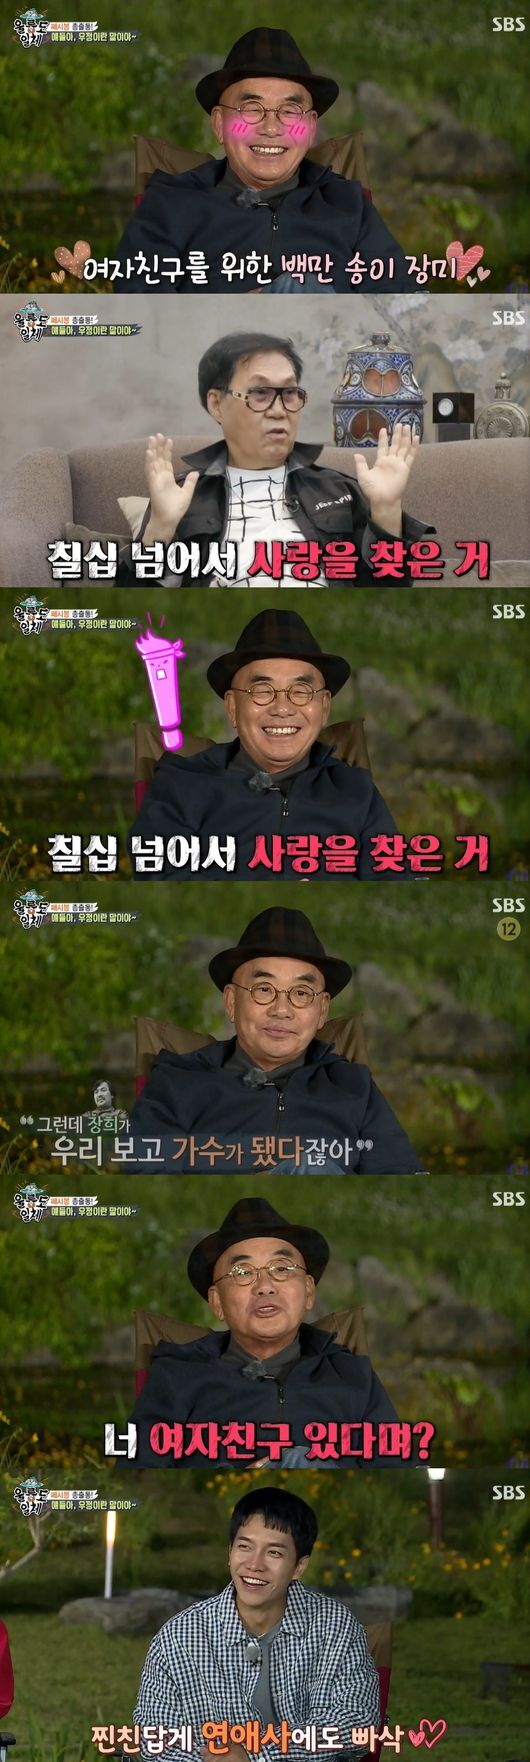 In All The Butlers, Yi Jang-hui delivered a special friendship with Cho Young-nam, Song Chang-sik, Youn Yuh-jung and Kim Soo-hyun, and Cha Eun-woo and Shin Sung-rok promised a strong friendship with the time capsule letter.SBS entertainment All The Butlers broadcasted on the 20th was broadcast.First, Yi Jang-hui said, I did not retire, but I was singing well at that time, and the cannabis wave was happening at that time. I was doing a late-night DJ at that time, and suddenly took me to Seodaemun Detention Center in the evening.It snowed outside the window, he said. I was once the most famous singer and composer, and I am here for my wrong behavior. What now?I wanted to stop this, he said. I decided to retire.At this time, Song Chang-sik appeared, followed by Song Chang-sik, who made Rain outside the window with Yi Jang-hui, and recalled, It was Youn Yuh-jung birthday, which was the birthday of the Cecibong family.Yi Jang-hui added that he had been in charge of the Academy Award for Best Supporting Actress for a long time, saying, I am an alumni of the elementary school.In the meantime, Yi Jang-hui said, Is Jang Hee GFriend? Is it beautiful? Yi Jang-hui laughed at the surprise, saying, How do you know? Beautiful.Cho Young-nam said, I am good at Yi Jang-hui. Song Chang-sik commented on Cho Young-nam, Cho Young-nam, a mentor of Cecibong, is a big brother who is a spiritual landlord. Cho Young-nam said, Uncle Jang Hee- I said it was done, and Yi Jang-hui acknowledged it.At this time, Cho Young-nam also said, Yi Jang-hui was the most successful over 70, and I found love, and a rose white song was presented to GFriend. Yi Jang-hui smiled shyly.Yi Jang-hui was away, and only the members gathered at the hostel.All of them said, I am sorry for sleeping today, but I still have a romance that my graduation trip is Ulleungdo.Cha Eun-woo boarded the ship with the two-way model and said, I wanted to be happy these days, Cha Eun-woo felt like there was no comrade. It was fun to come to see my brothers, not my mouth, I was excited and excited.Again, it was gathered at the Ulleung Airport Heaven Center in Yi Jang-hui.Yi Jang-hui said, For me, heaven is a good friend and music. He mentioned the Ulleung Airport Heaven. He also admired the balance game as a romantist if he said that one of the remaining songs and love is love.But it was also Friend that the master Yi Jang-hui could not be left out in life.He said of his Friend, As the gifts, manets, and monet painters made by the times interacted, a relationship has been established, he said. Is not one of those Friends even receiving an award for Academia?Members of a valuable relationship, like masters and friends.Cha Eun-woo said, I had an unexplained feeling on my heart, and I have also prepared a time capsule of memories, revealing a letter written before coming.I prepared to take time with my brothers, I want to remember today when I am good and one, he said.Everyone said, Ulleungdo will come and see you together, Ulleungdo will come and think.Everyone said, I want to come back in 10 ~ 20 years, I want to open it when it is sixty and one. In particular, Donghyun promised to come back in 2041 when his brother is like that.The members who left their last photos as All The Butlers members, together, promised to see you in 21 years and made a sticky friendship.Since then, the trailer has already been expected to announce the departure of Park, a daily student.All The Butlers broadcast screen capture